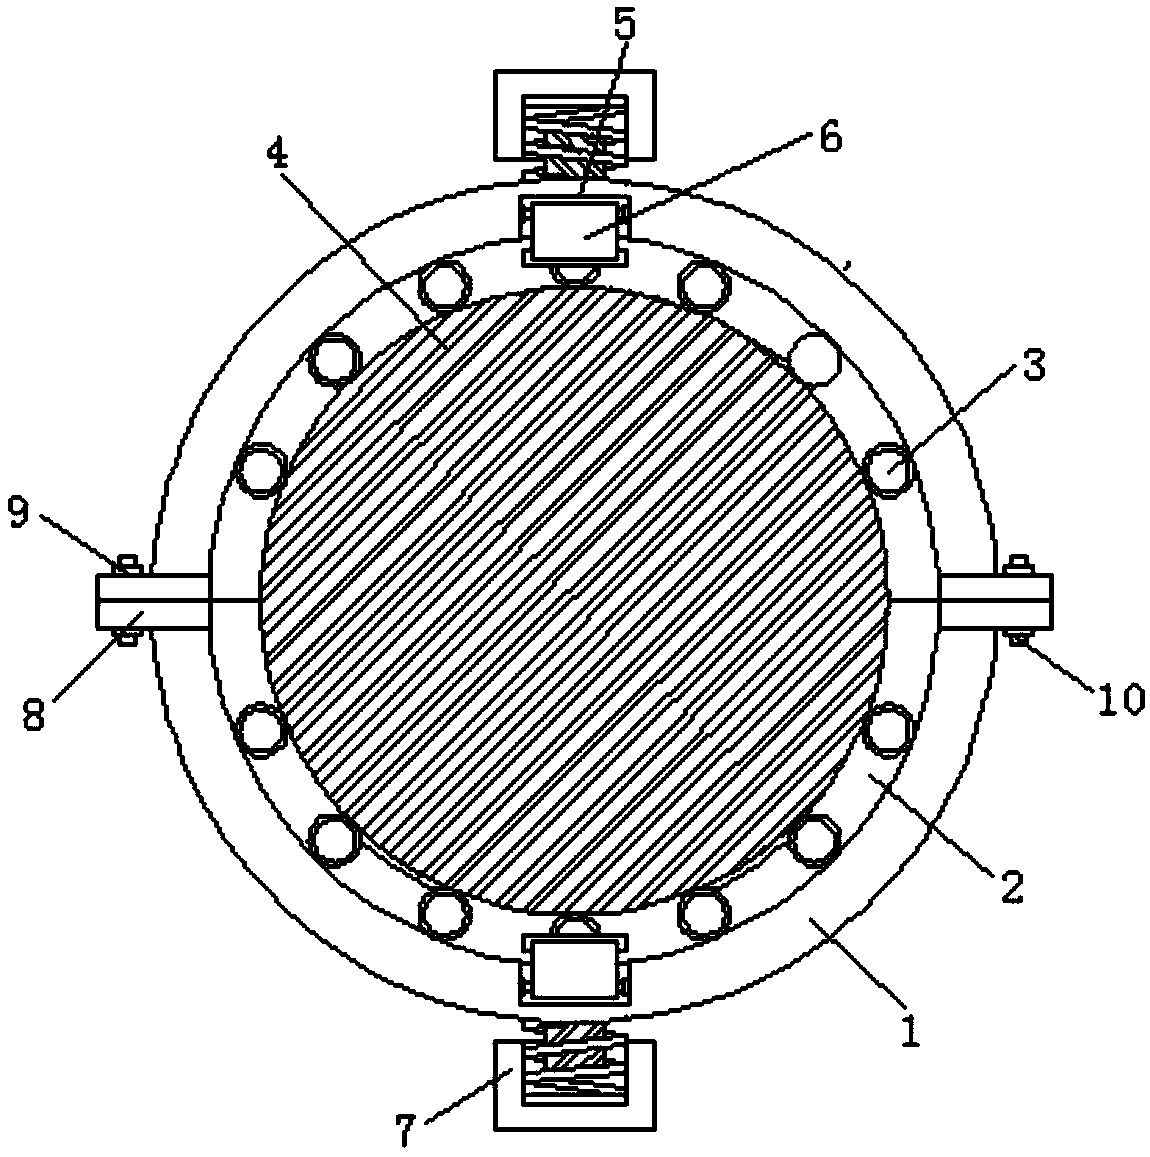 Fixing structure for filtering membrane in medical instrument